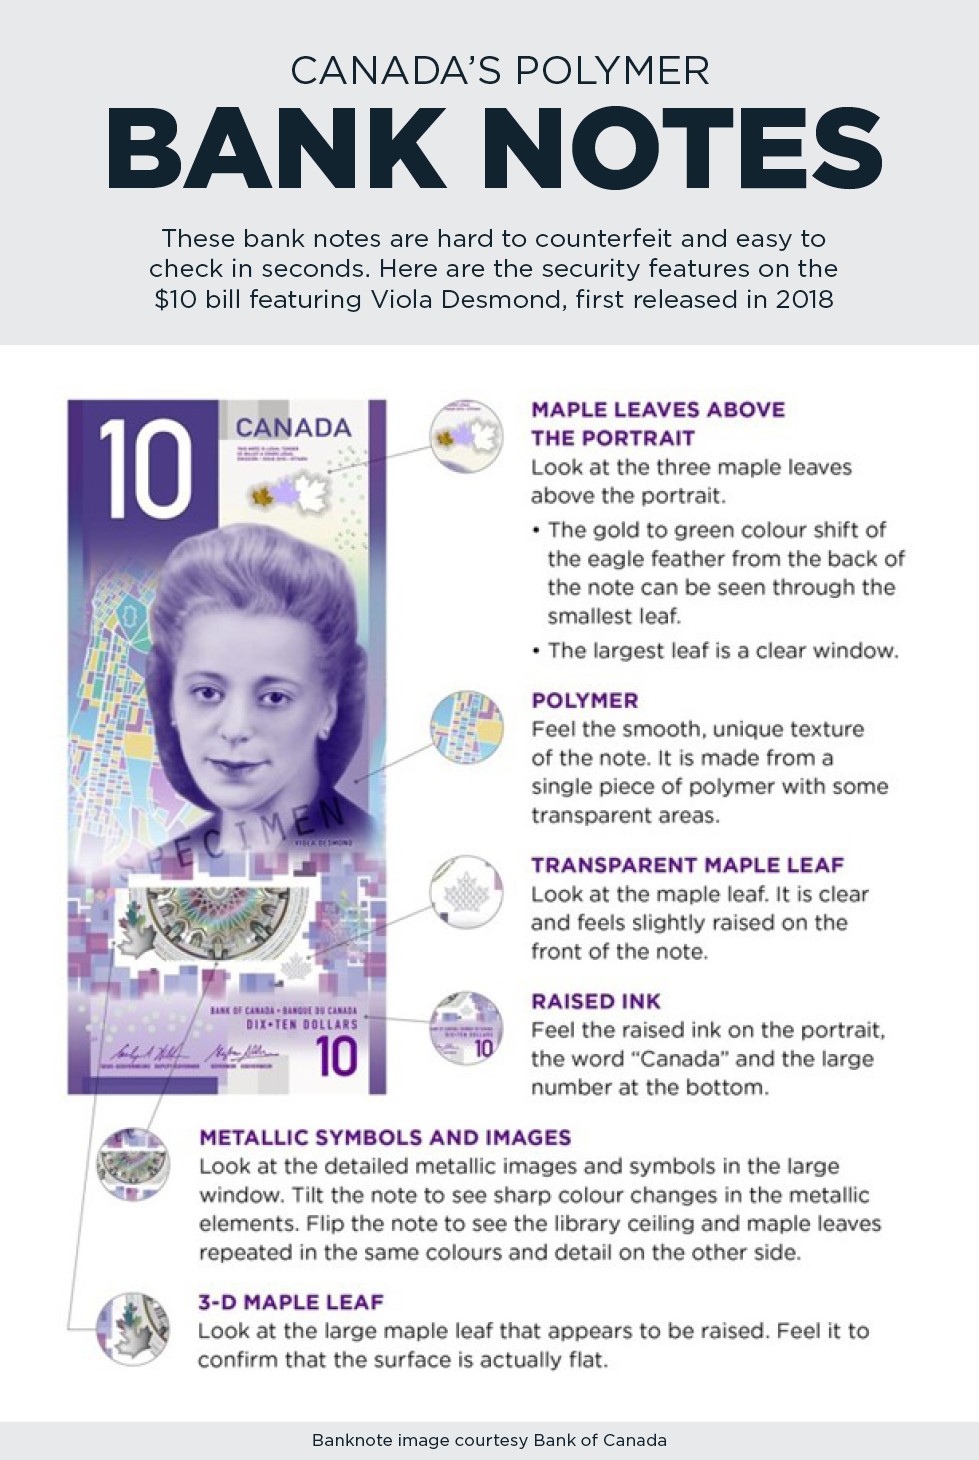 How are polymer bills made?